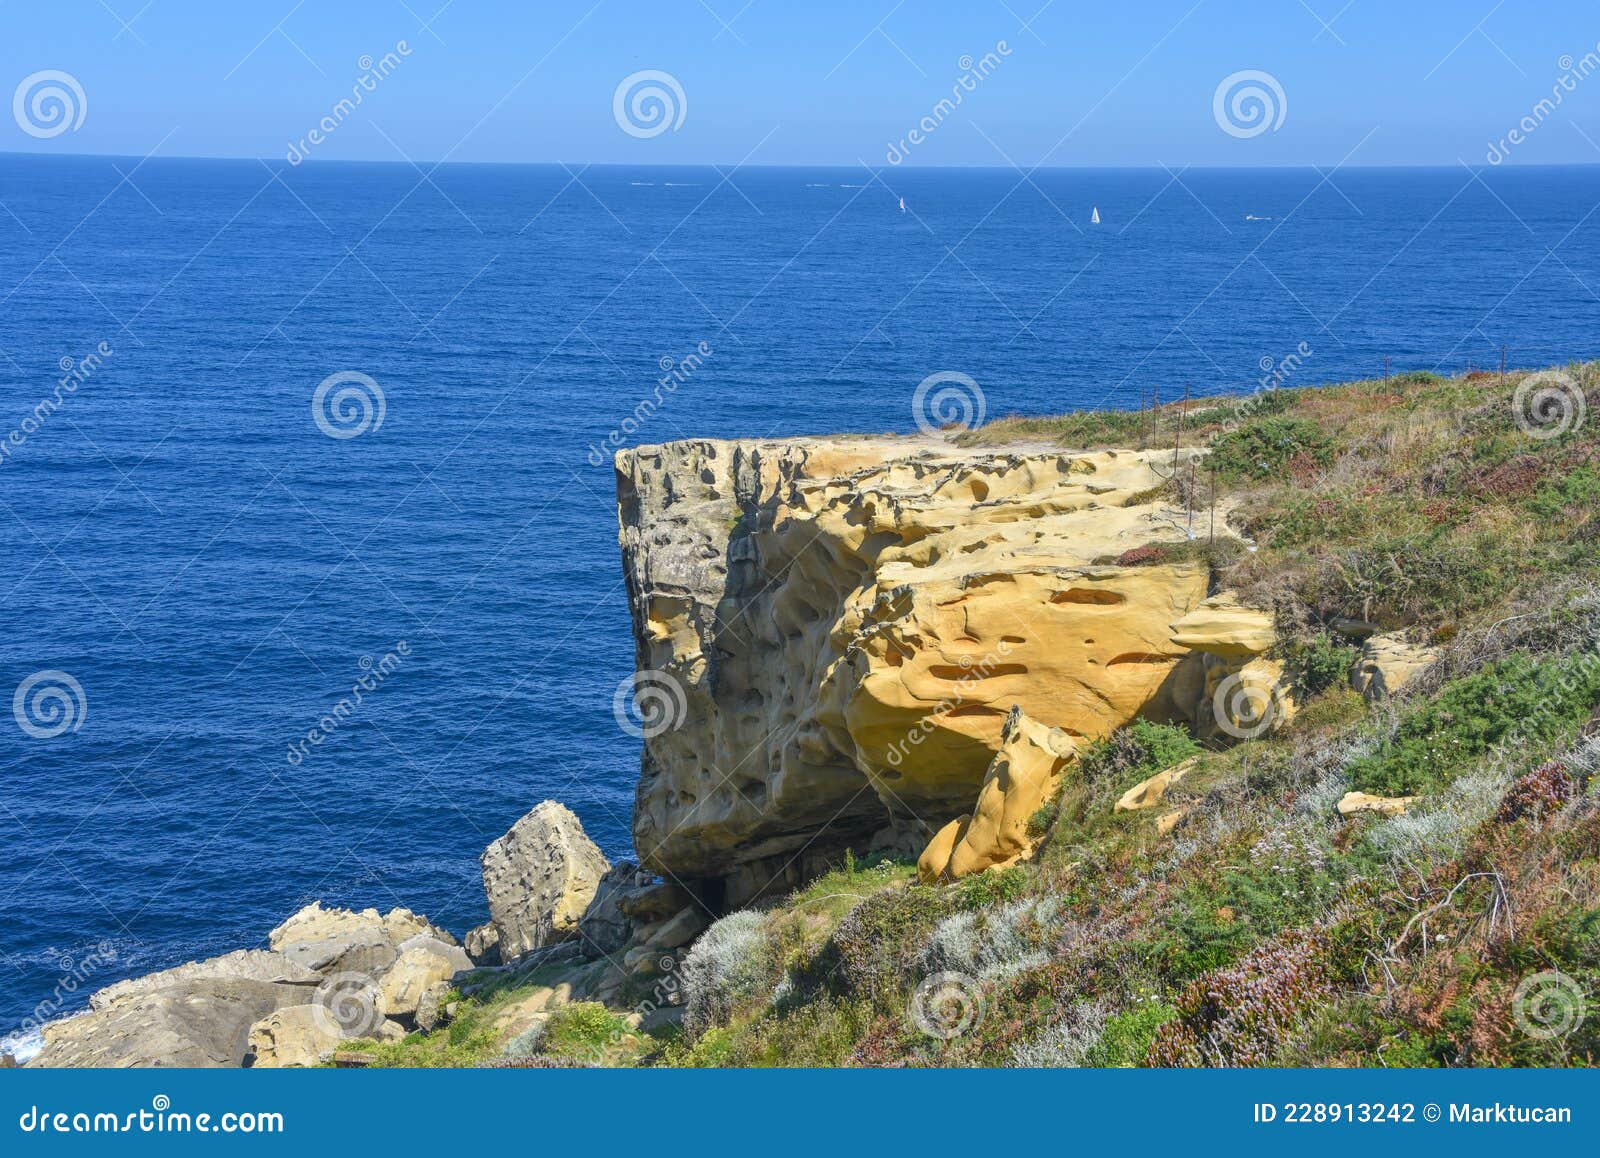 colourful rock formations on the cantabrian coastline. mount jaizkibel, basque country, spain